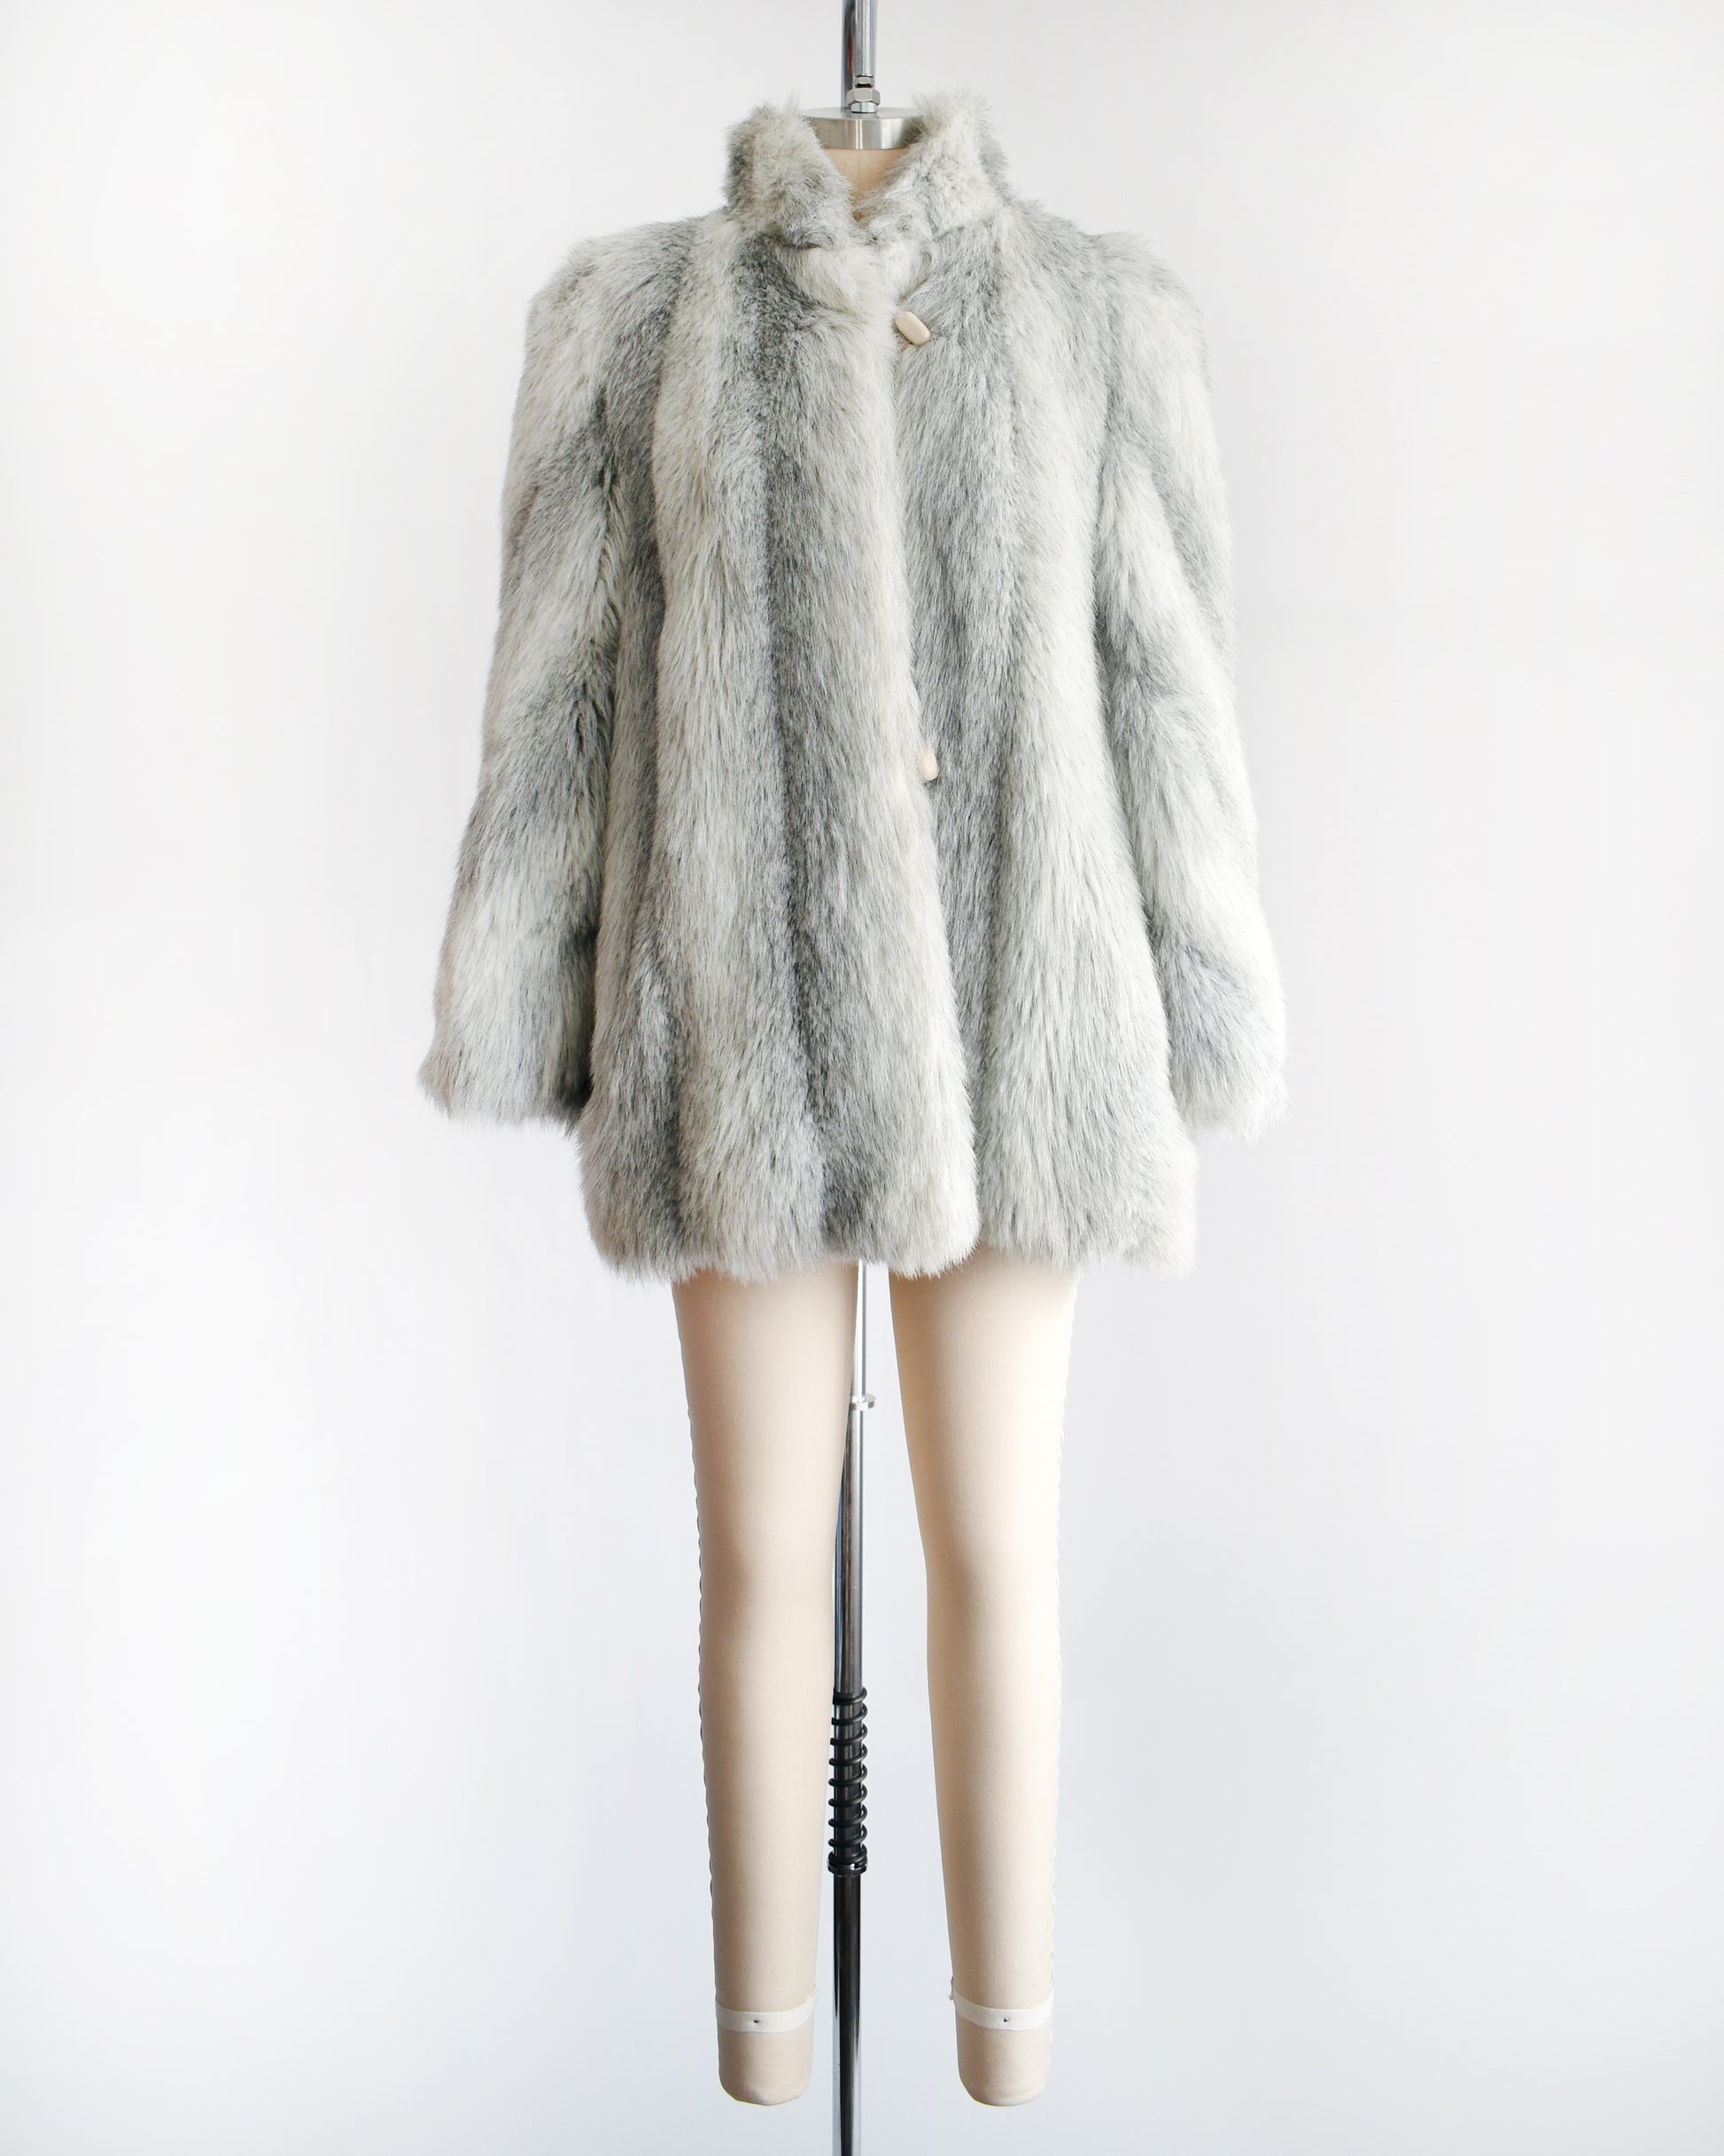 A vintage 1980s faux fur coat that features a plush white faux fur with light and dark gray stripes, a high collar, and structured puffed shoulders.